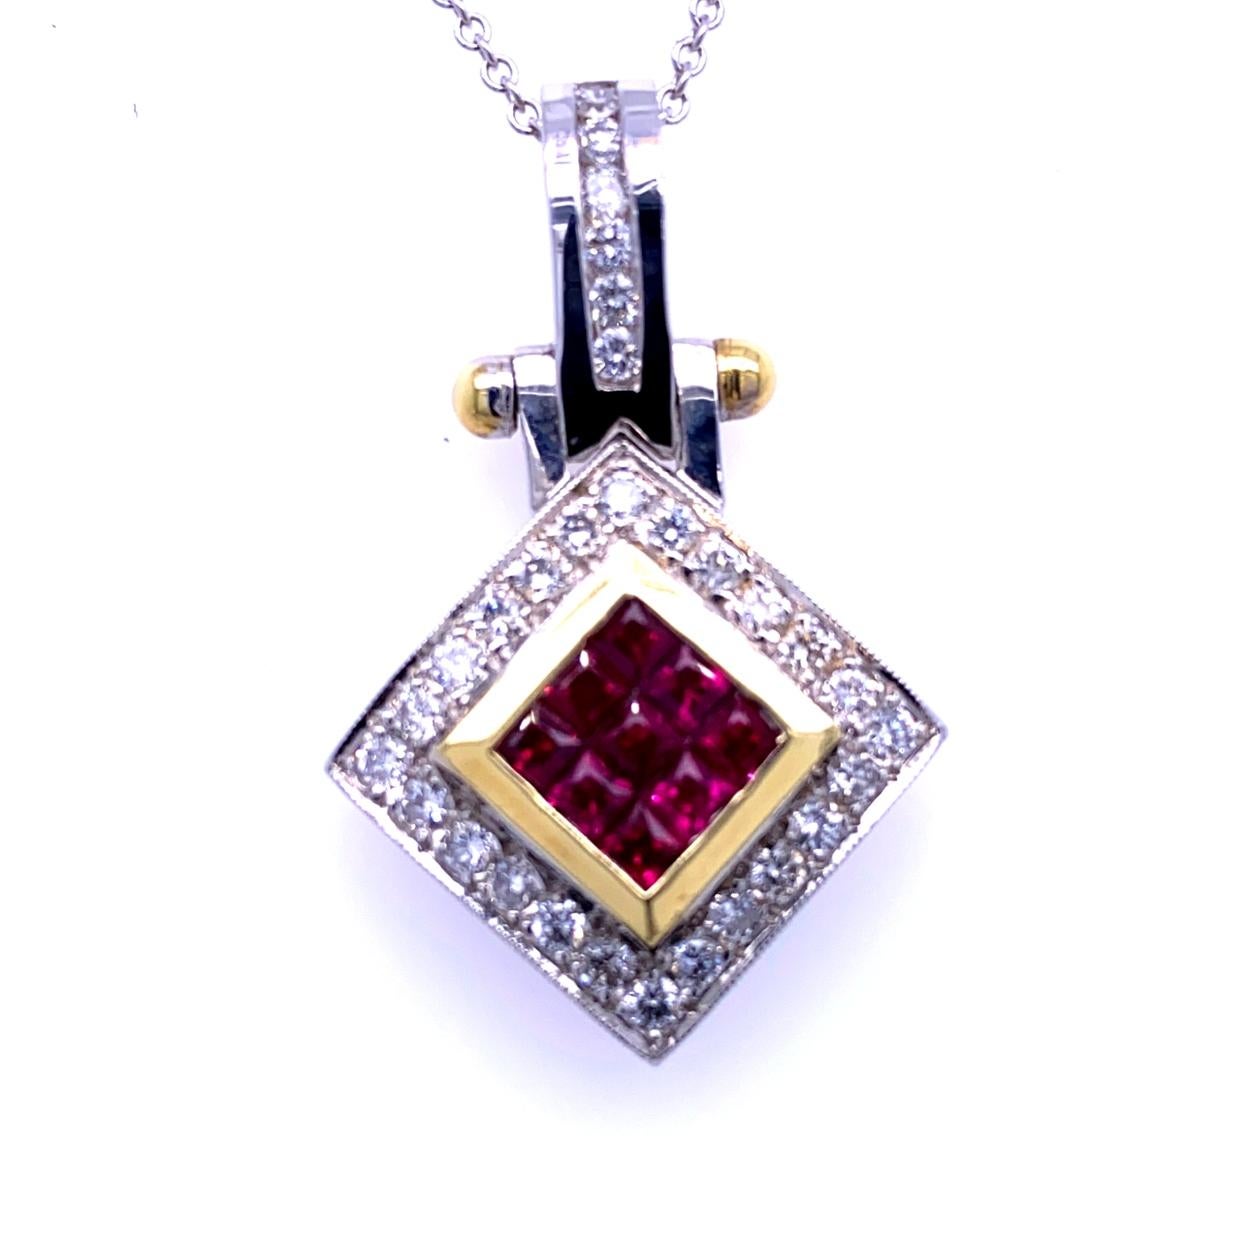 18K Gold Square Shape Diagonal Pendant with 9 Invisible Set Princess Cut Rubies (Total Gem Weight 0.97 Ct) surrounded by a pave set Halo of diamonds and channel set Bale with total weight of 0.81 Ct. 
Total Diamond Weight: 0.81 Ct
Total Gem Weight: